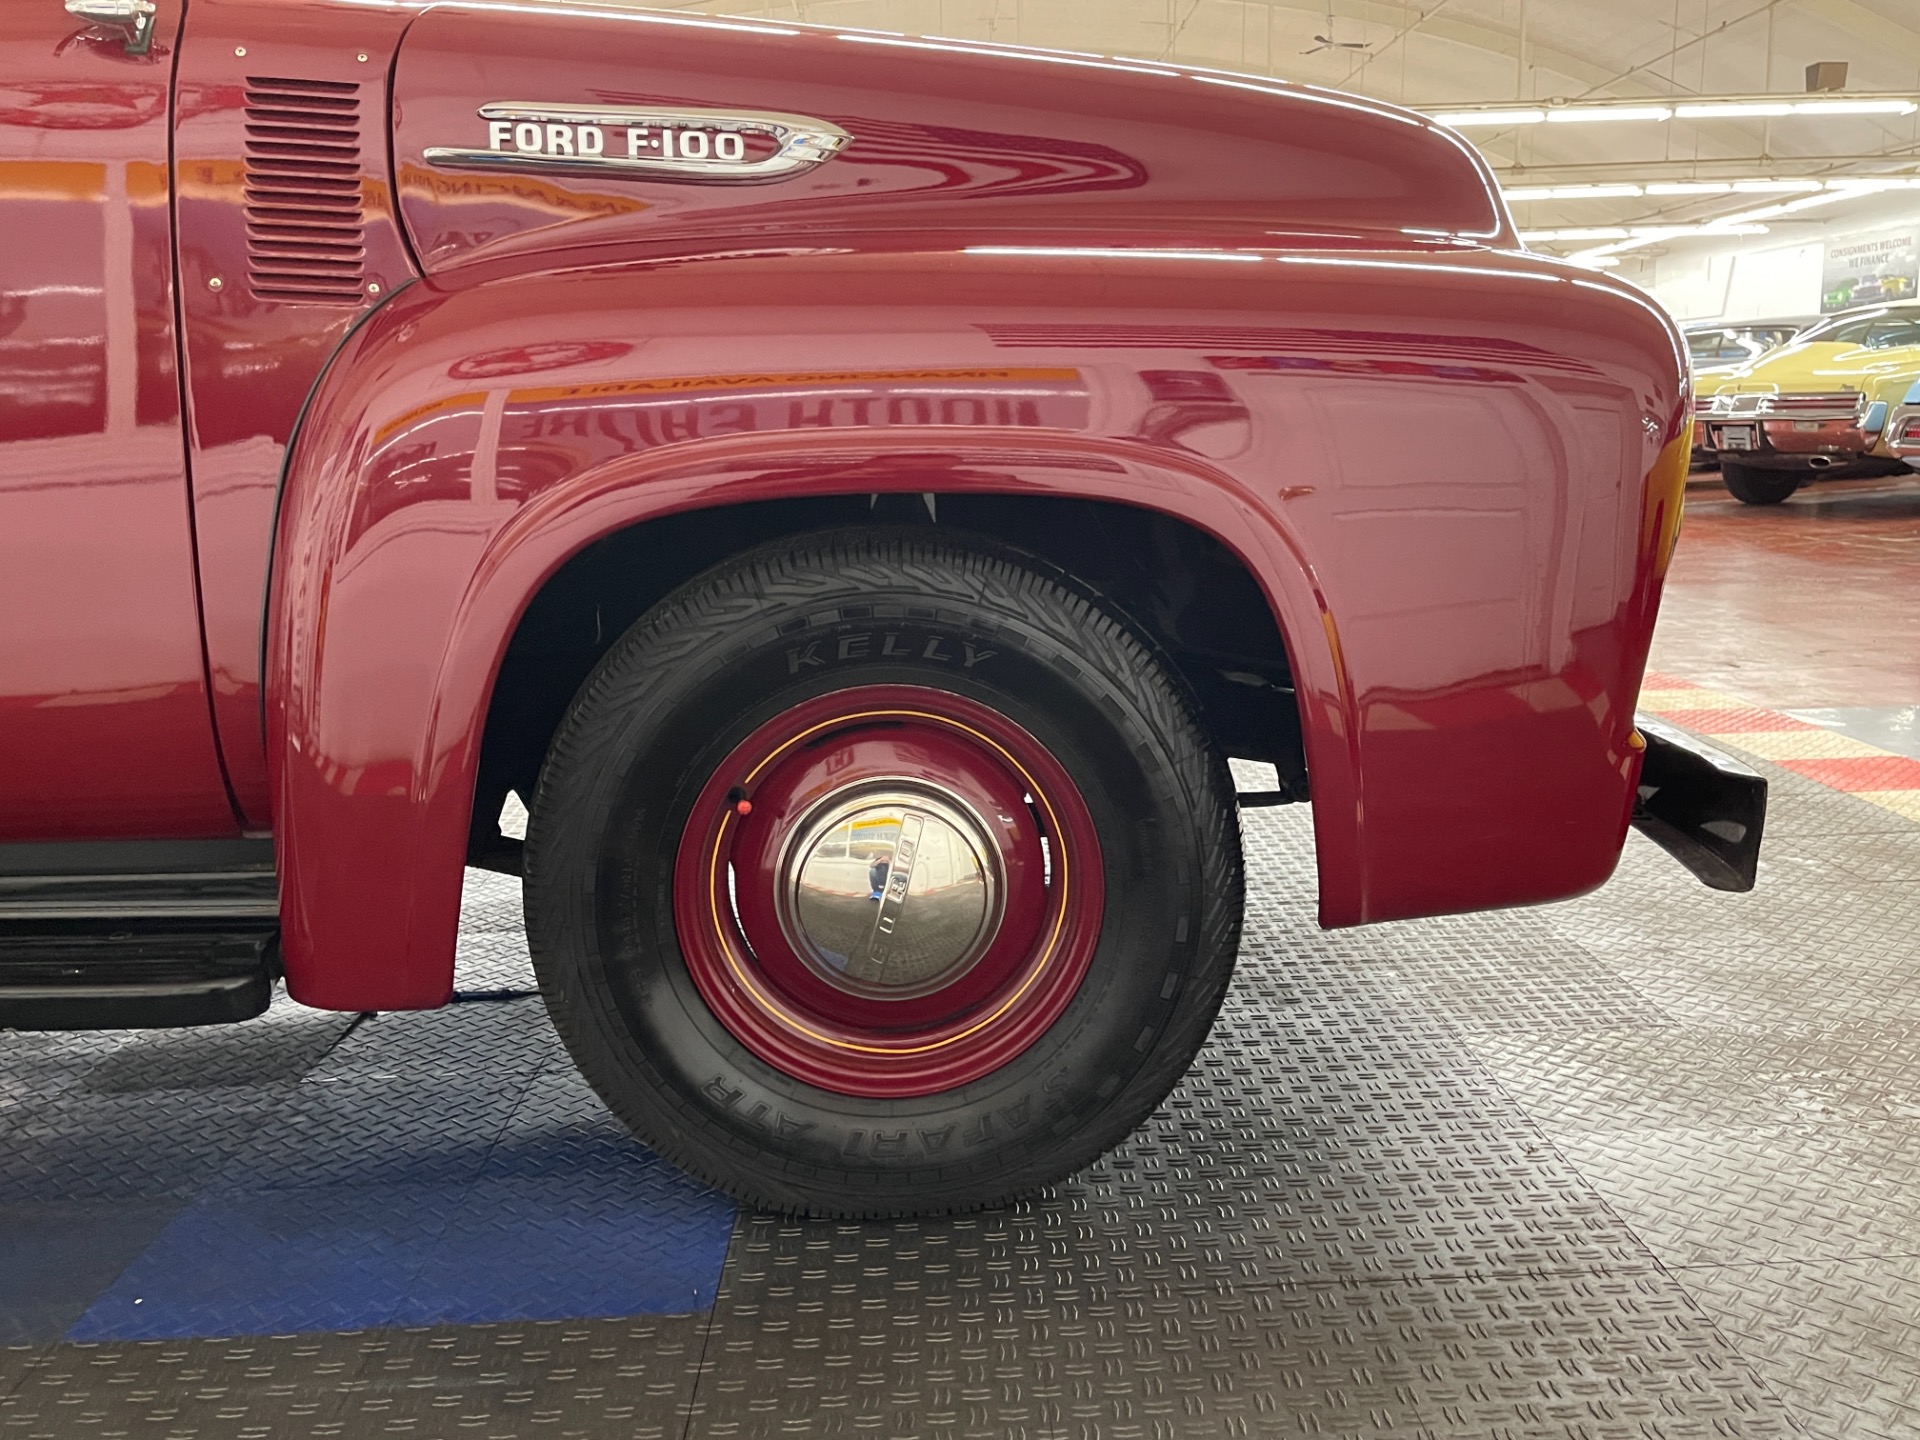 Used 1953 Ford Pickup - F-100 - FACTORY STYLING - HIGH QUALITY RESTORATION - SEE VIDEO | Mundelein, IL